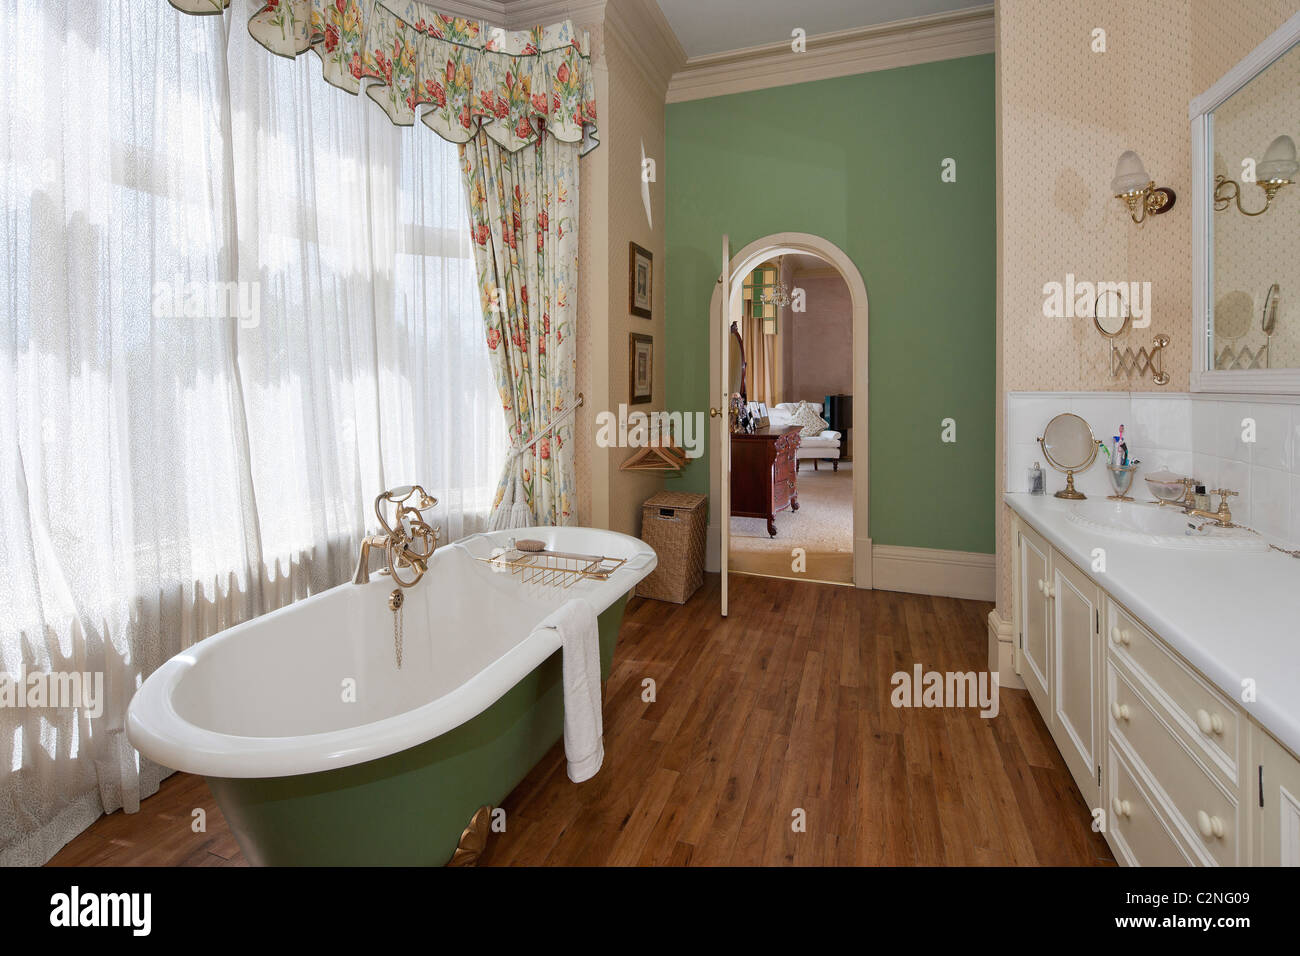 Ensuite bathroom with roll top bath, wooden floor an window drapes Stock Photo